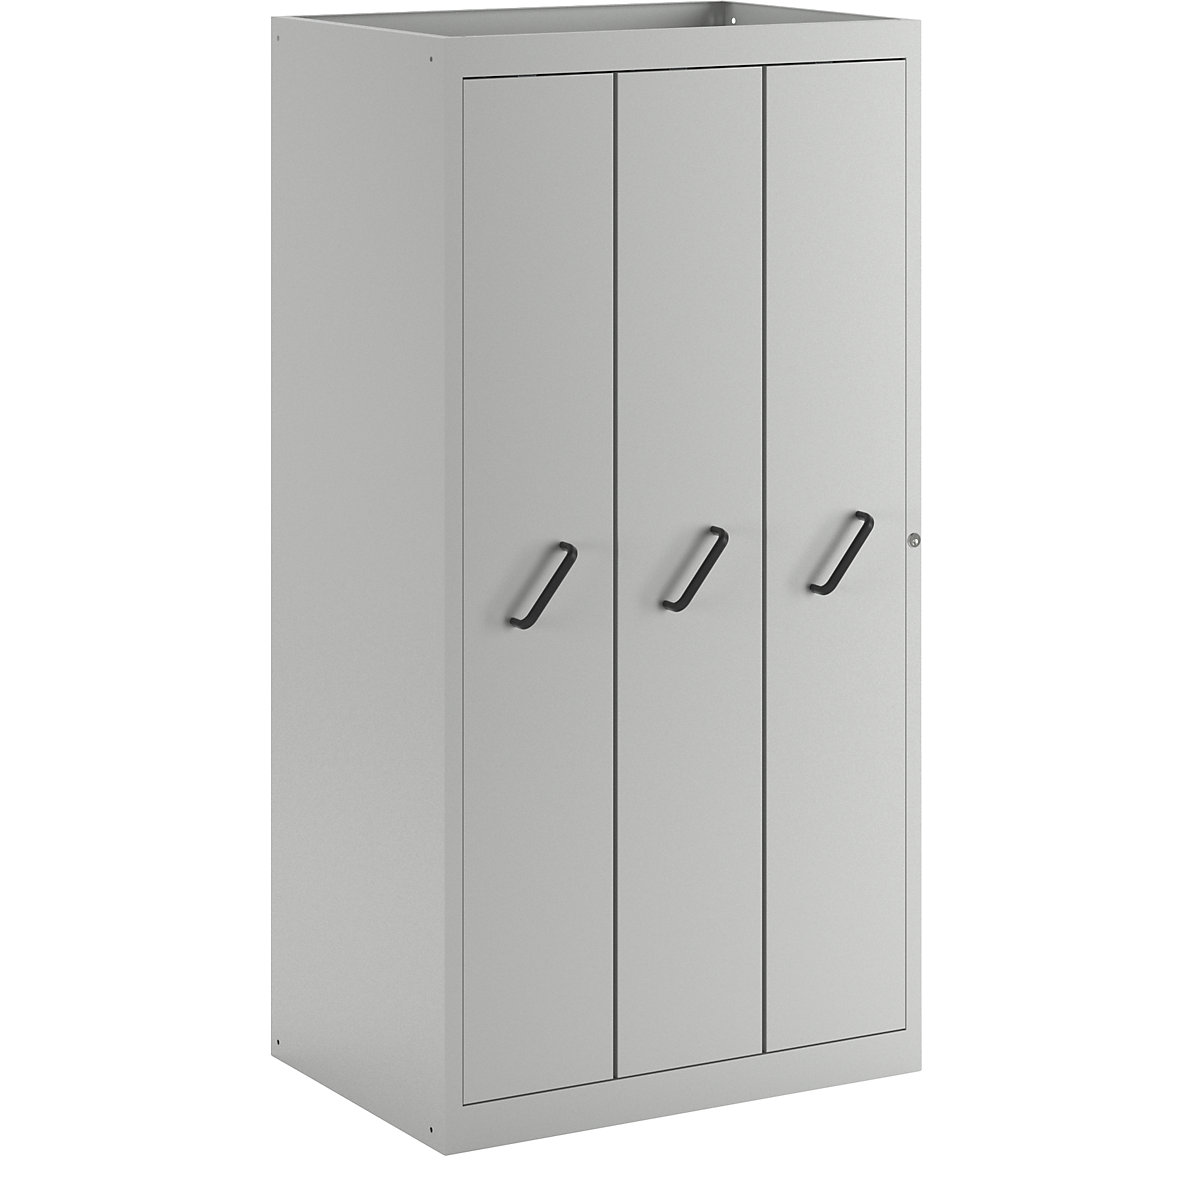 Vertical pull-out cupboard with front cover panels - LISTA